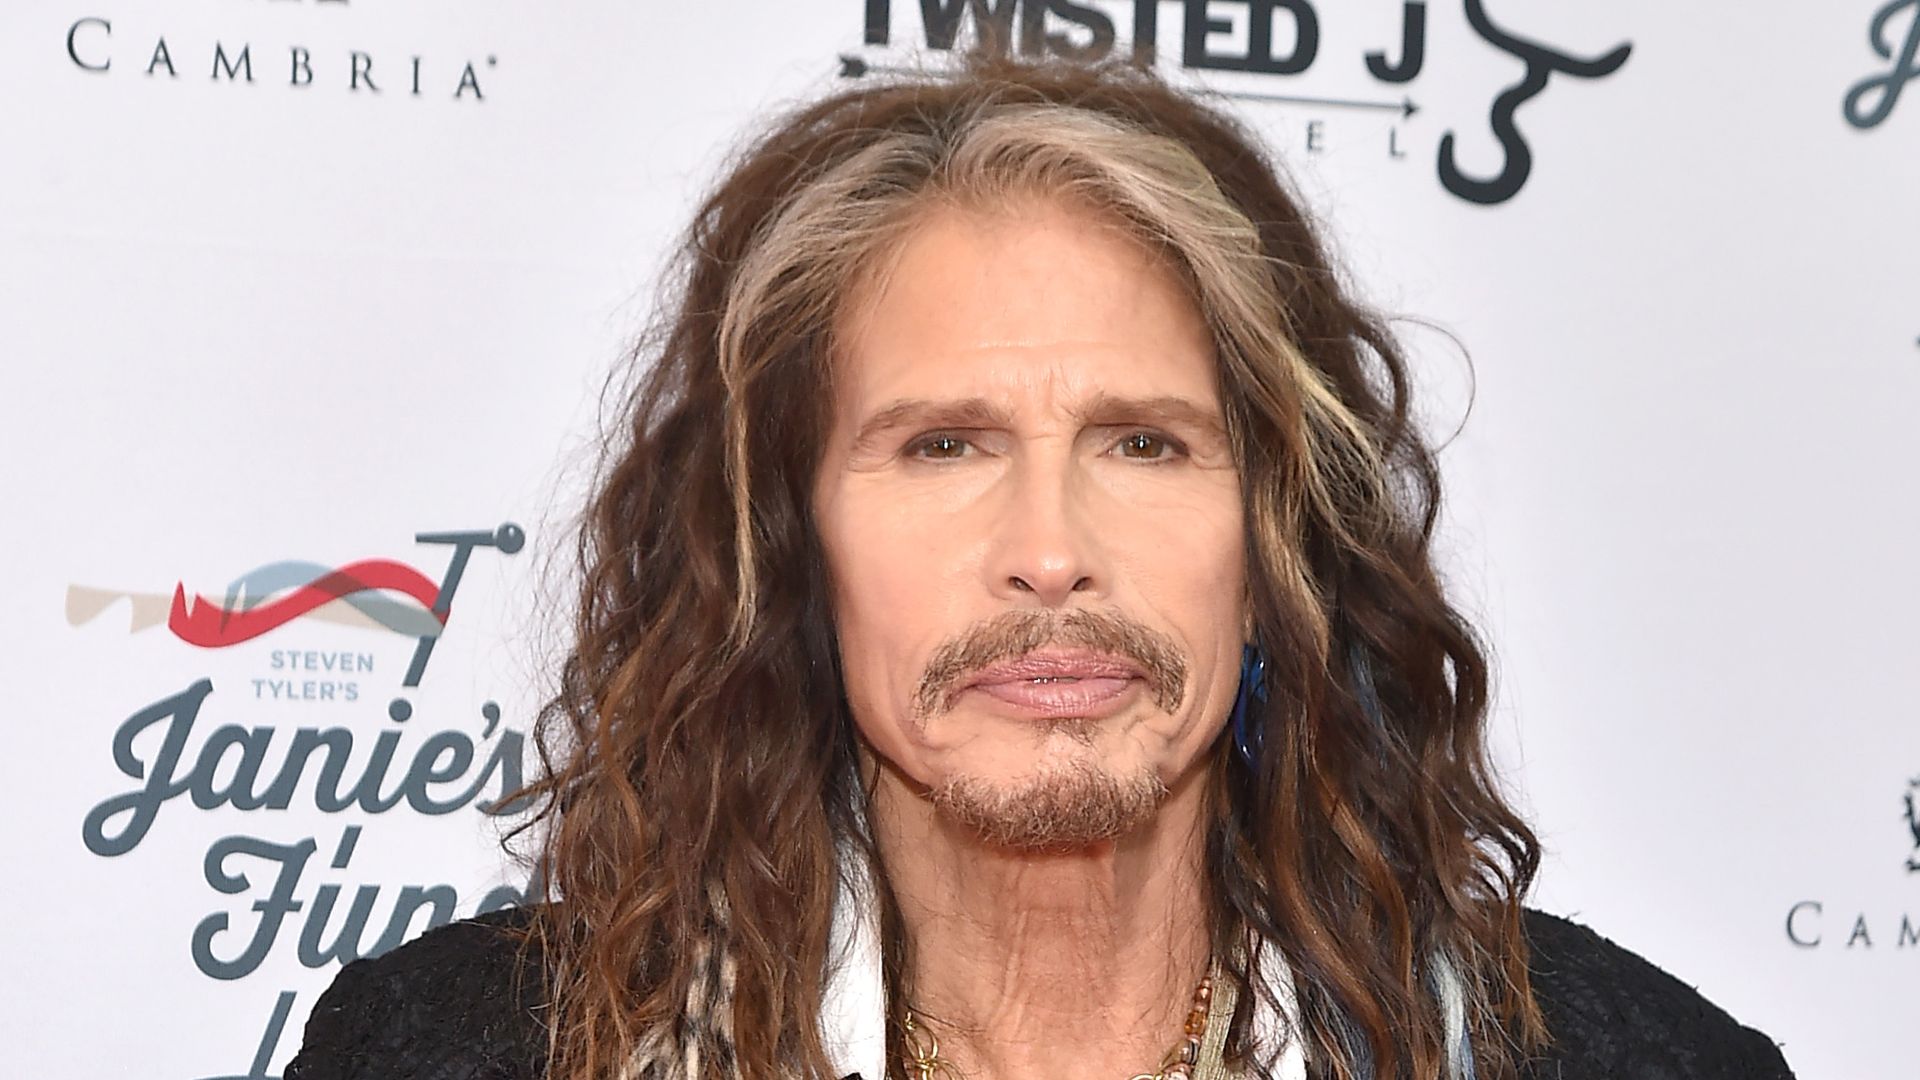 Steven Tyler attends "Steven Tyler...Out on a Limb" Show to Benefit Janie's Fund in Collaboration with Youth Villages - Red Carpet at David Geffen Hall on May 2, 2016 in New York City.